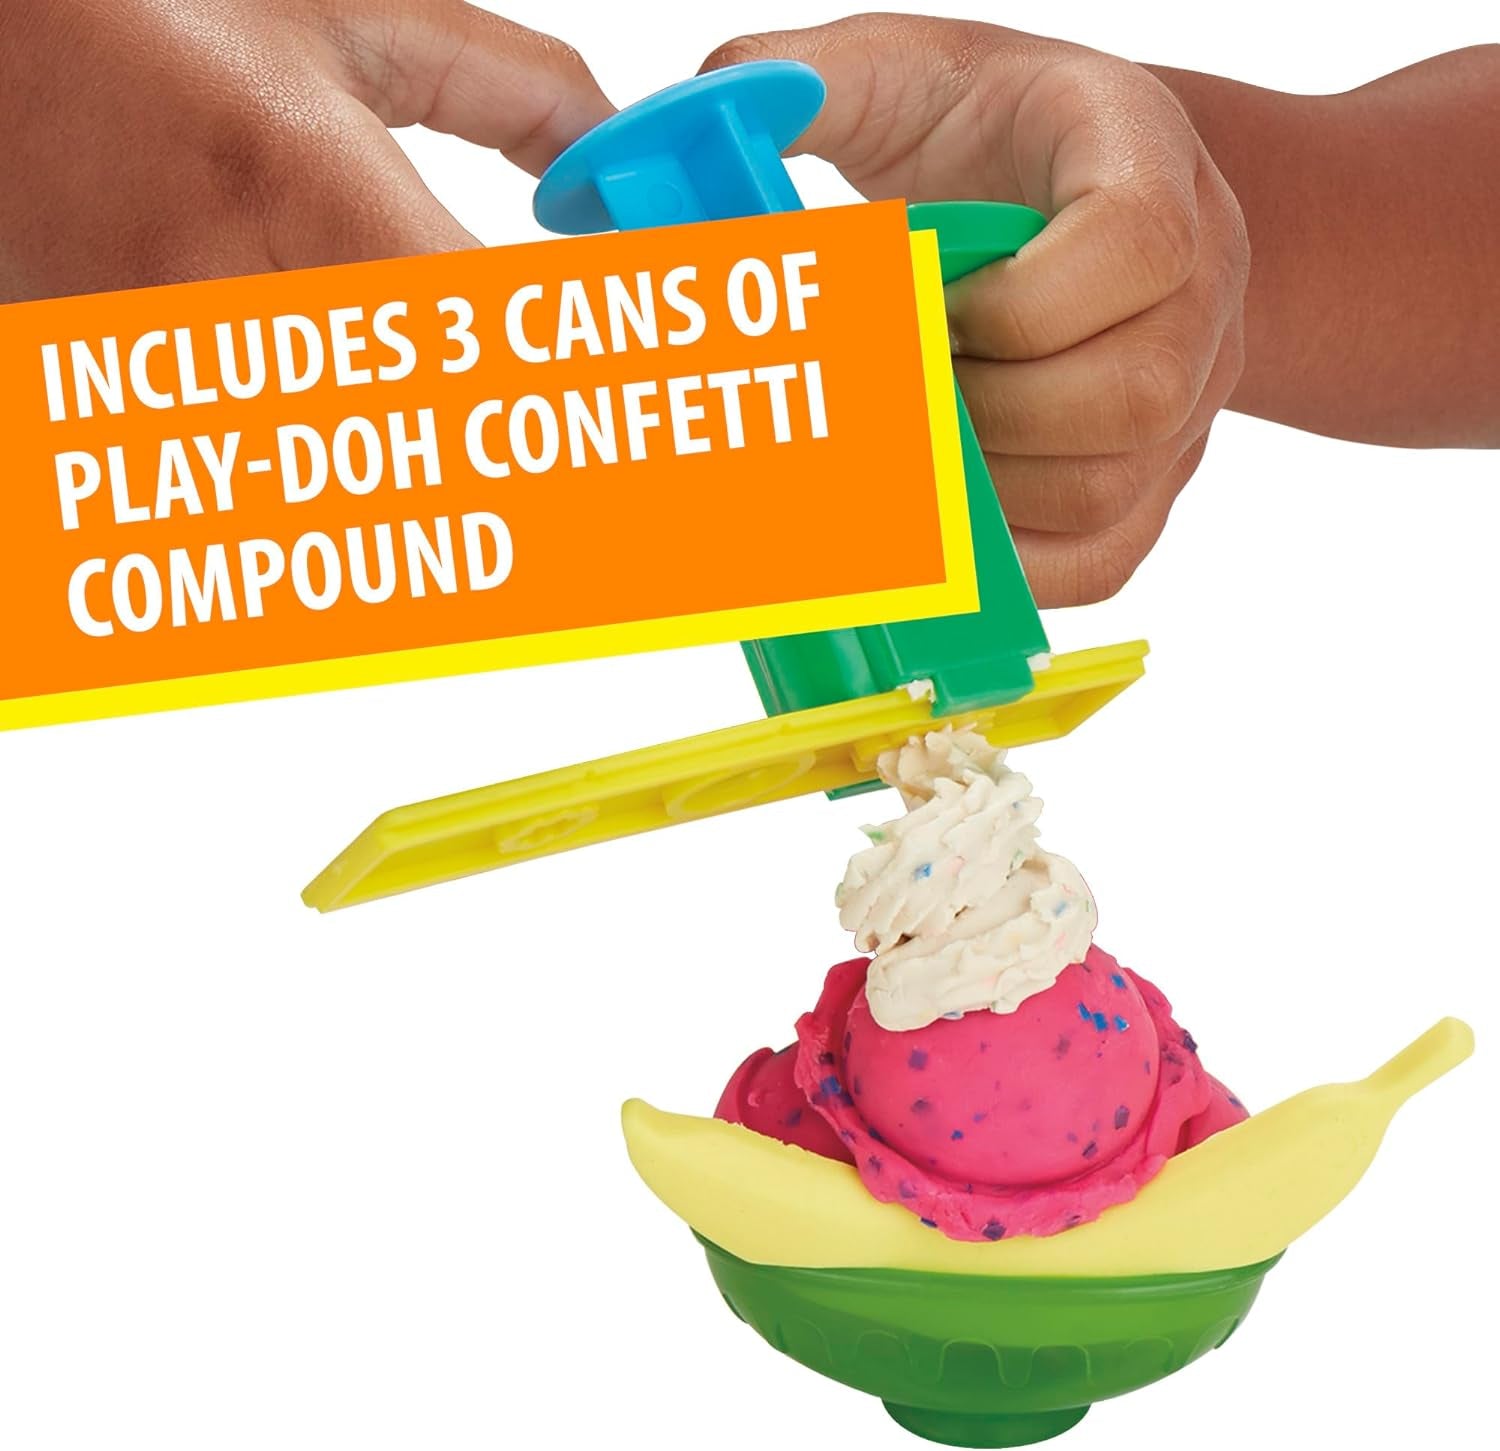 Kitchen Creations Ice Cream Party Play Food Set with 6  Colors, 2-Ounce Cans (Amazon Exclusive)